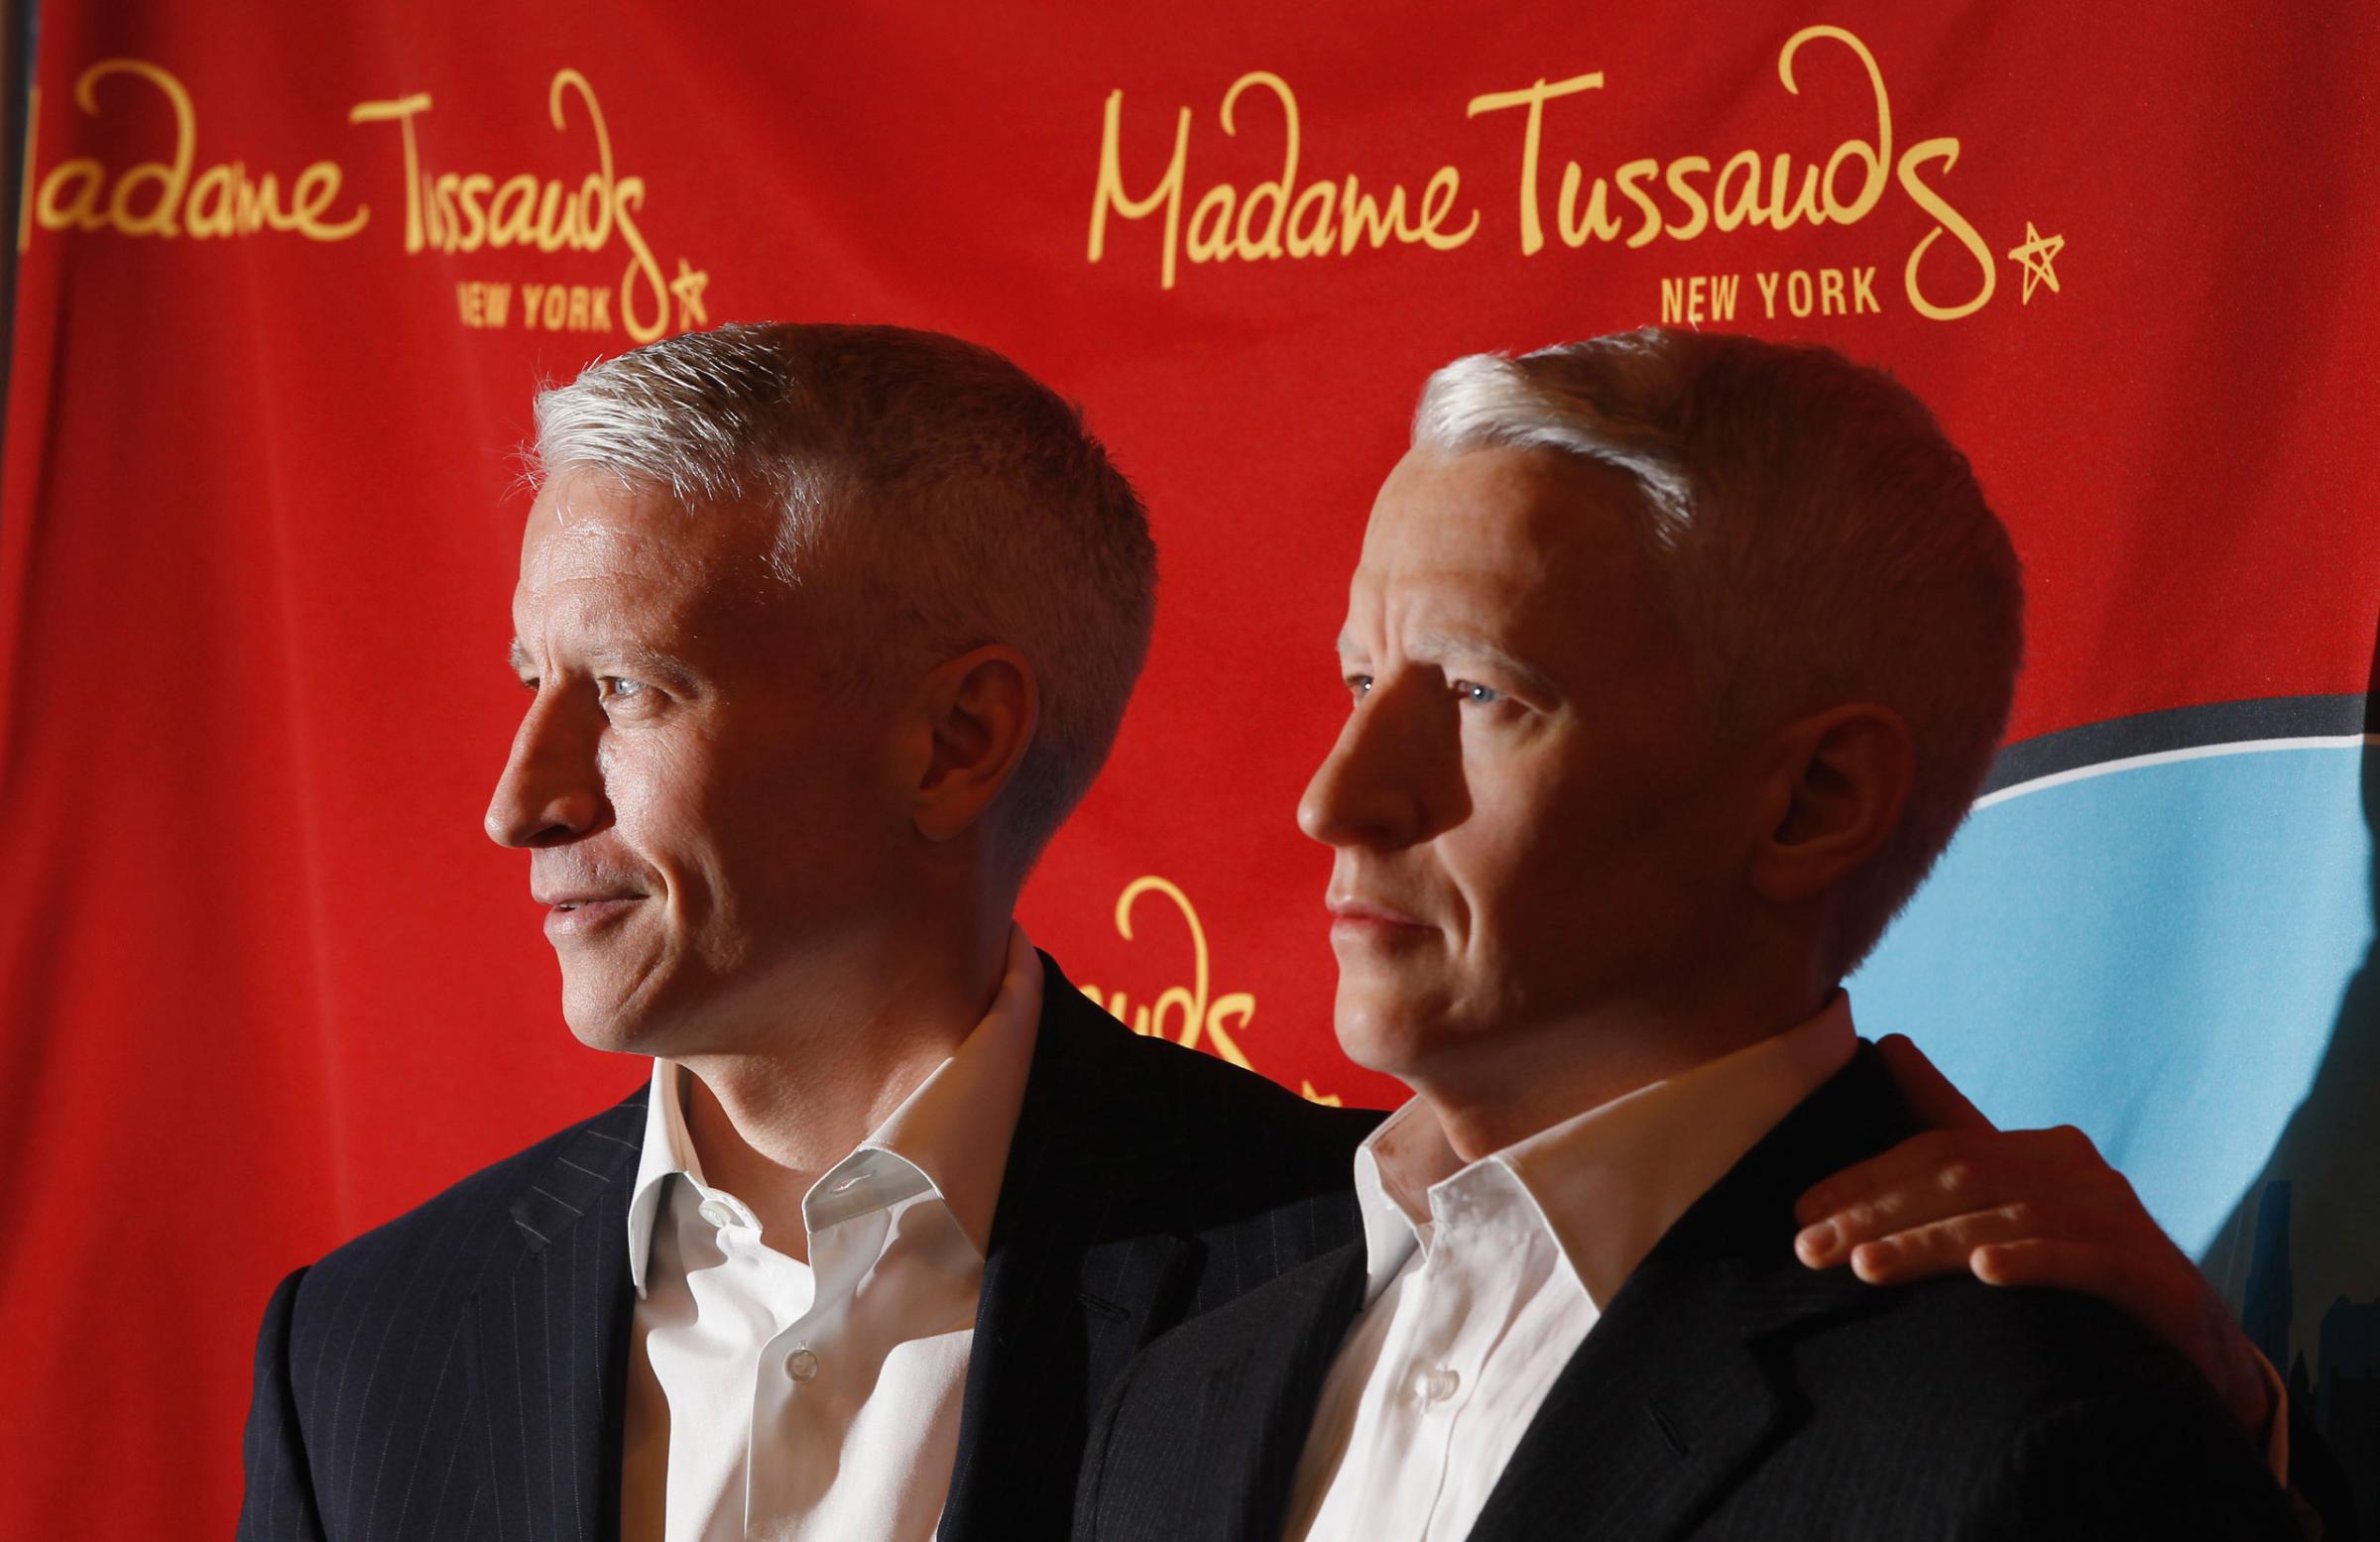 Television journalist Anderson Cooper poses with his wax figure as it is unveiled at Madame Tussauds in New York,